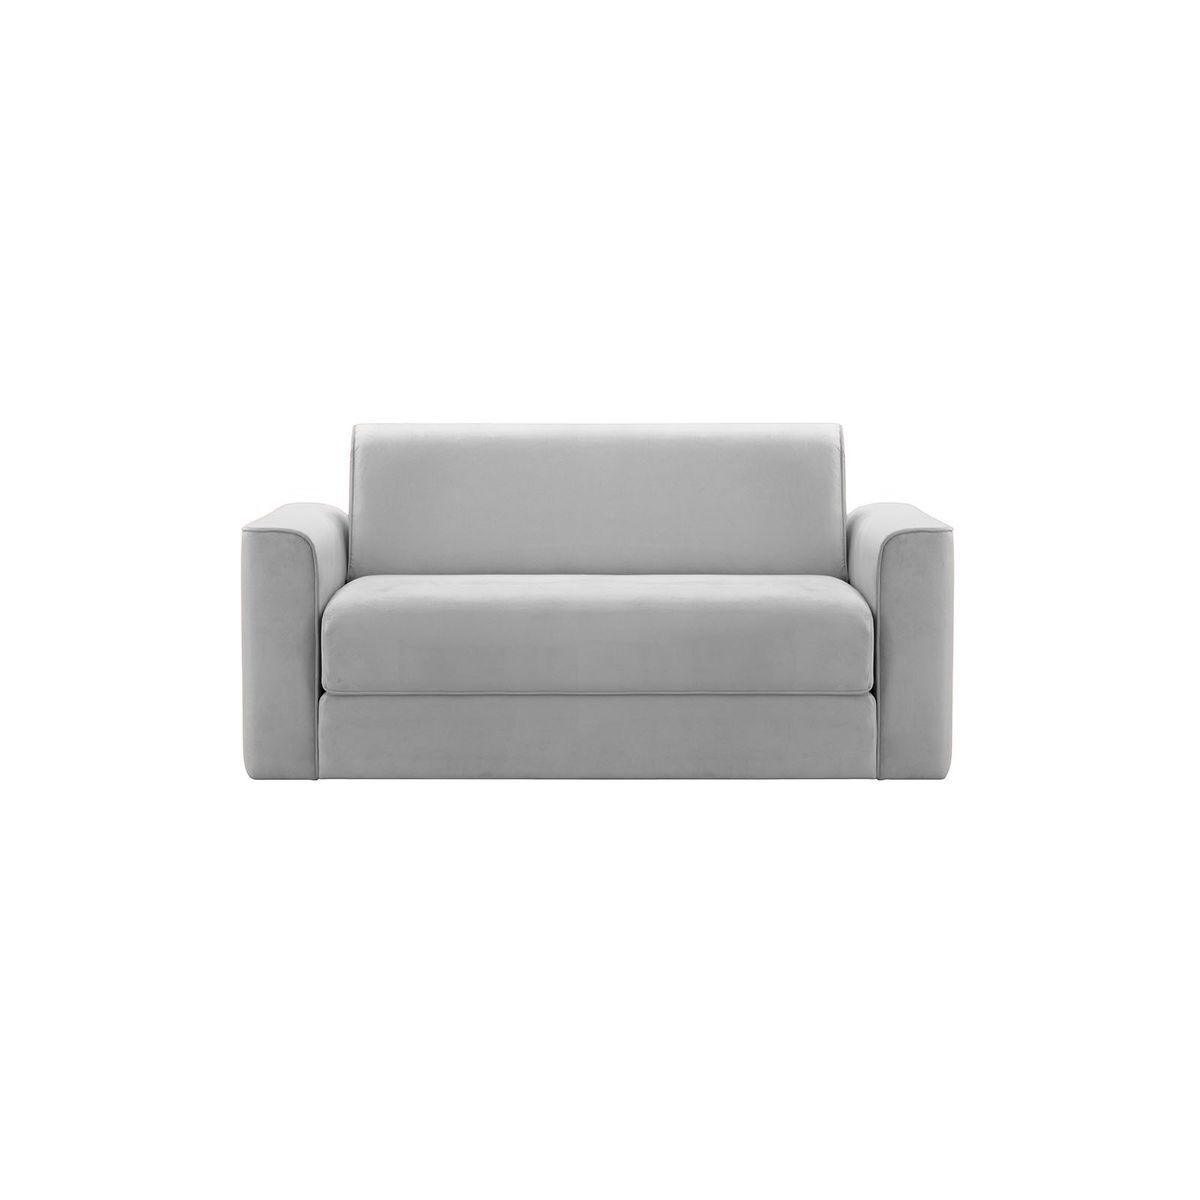 Jules 2.5 Seater Sofa Bed, silver - image 1